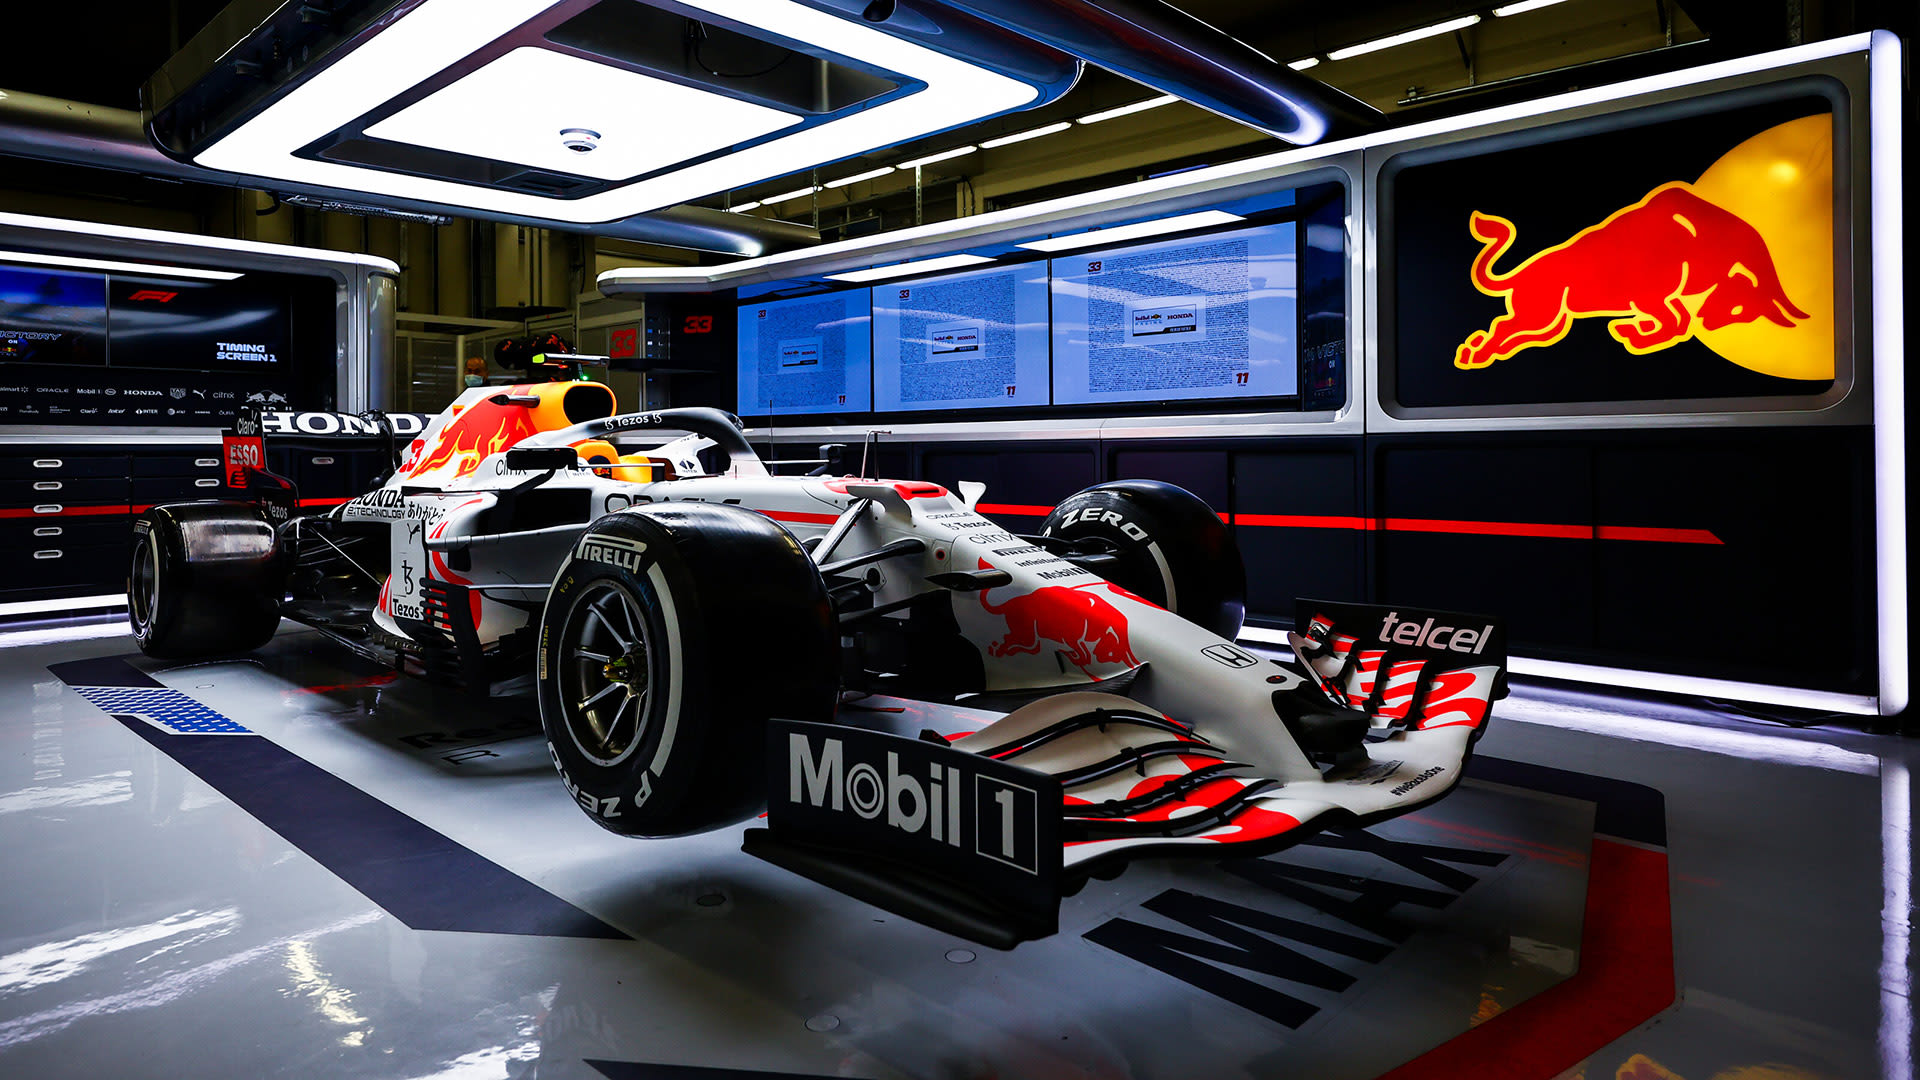 REVEALED Check out Red Bulls Honda tribute livery for the Turkish Grand Prix Formula 1®